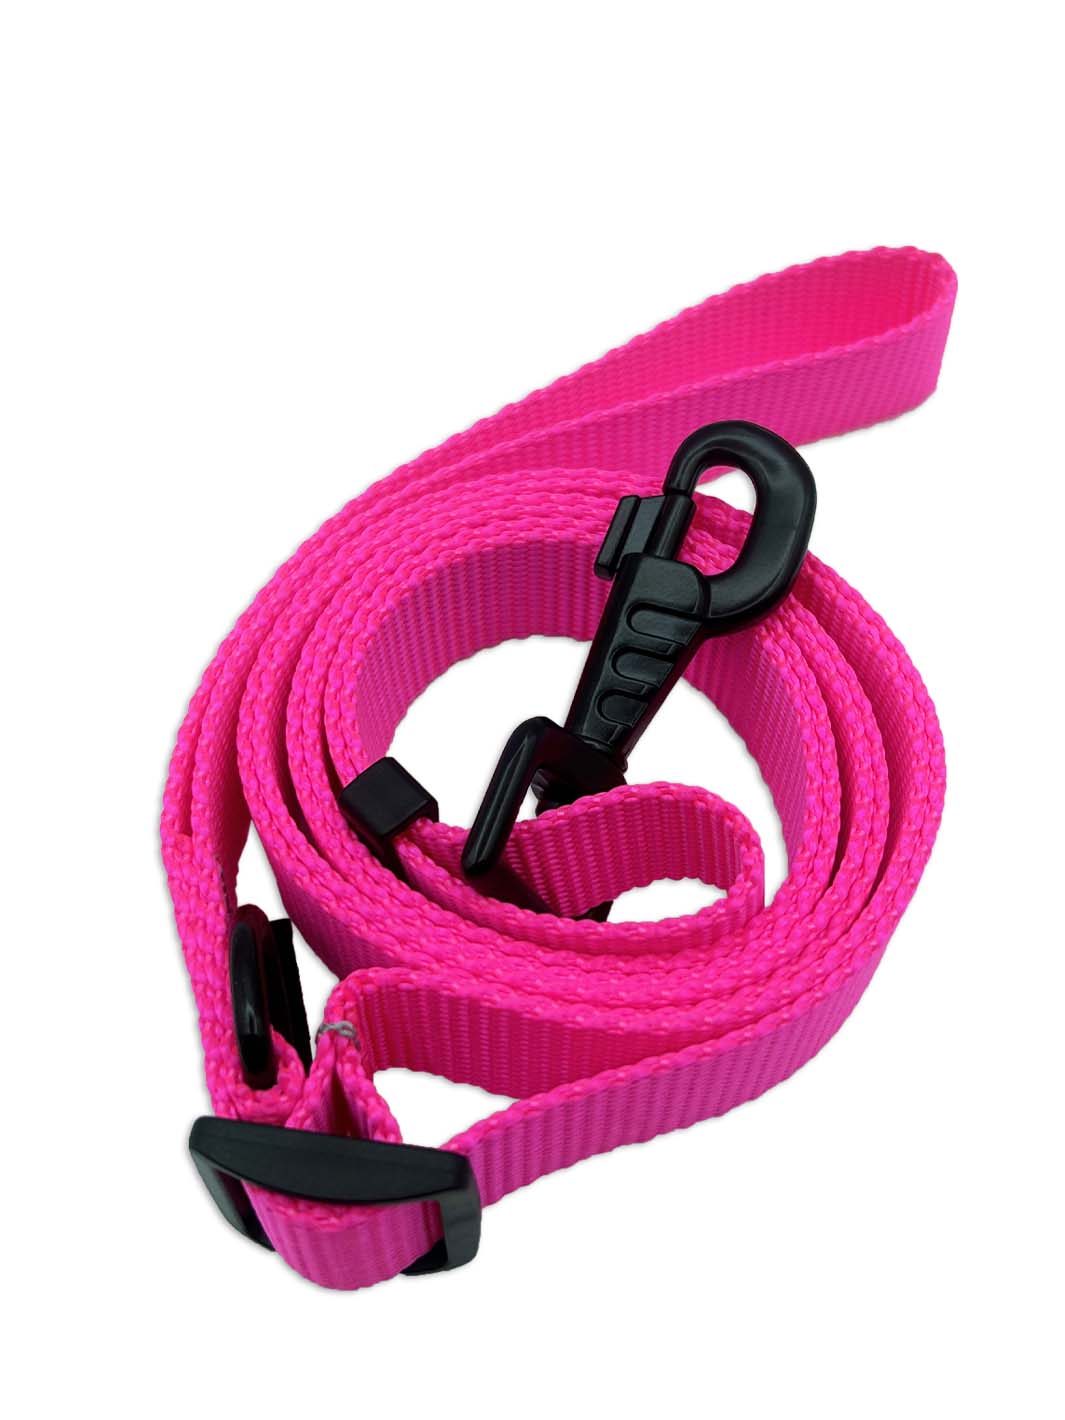 Neon pink dog leash in nylon strap coiled on surface.